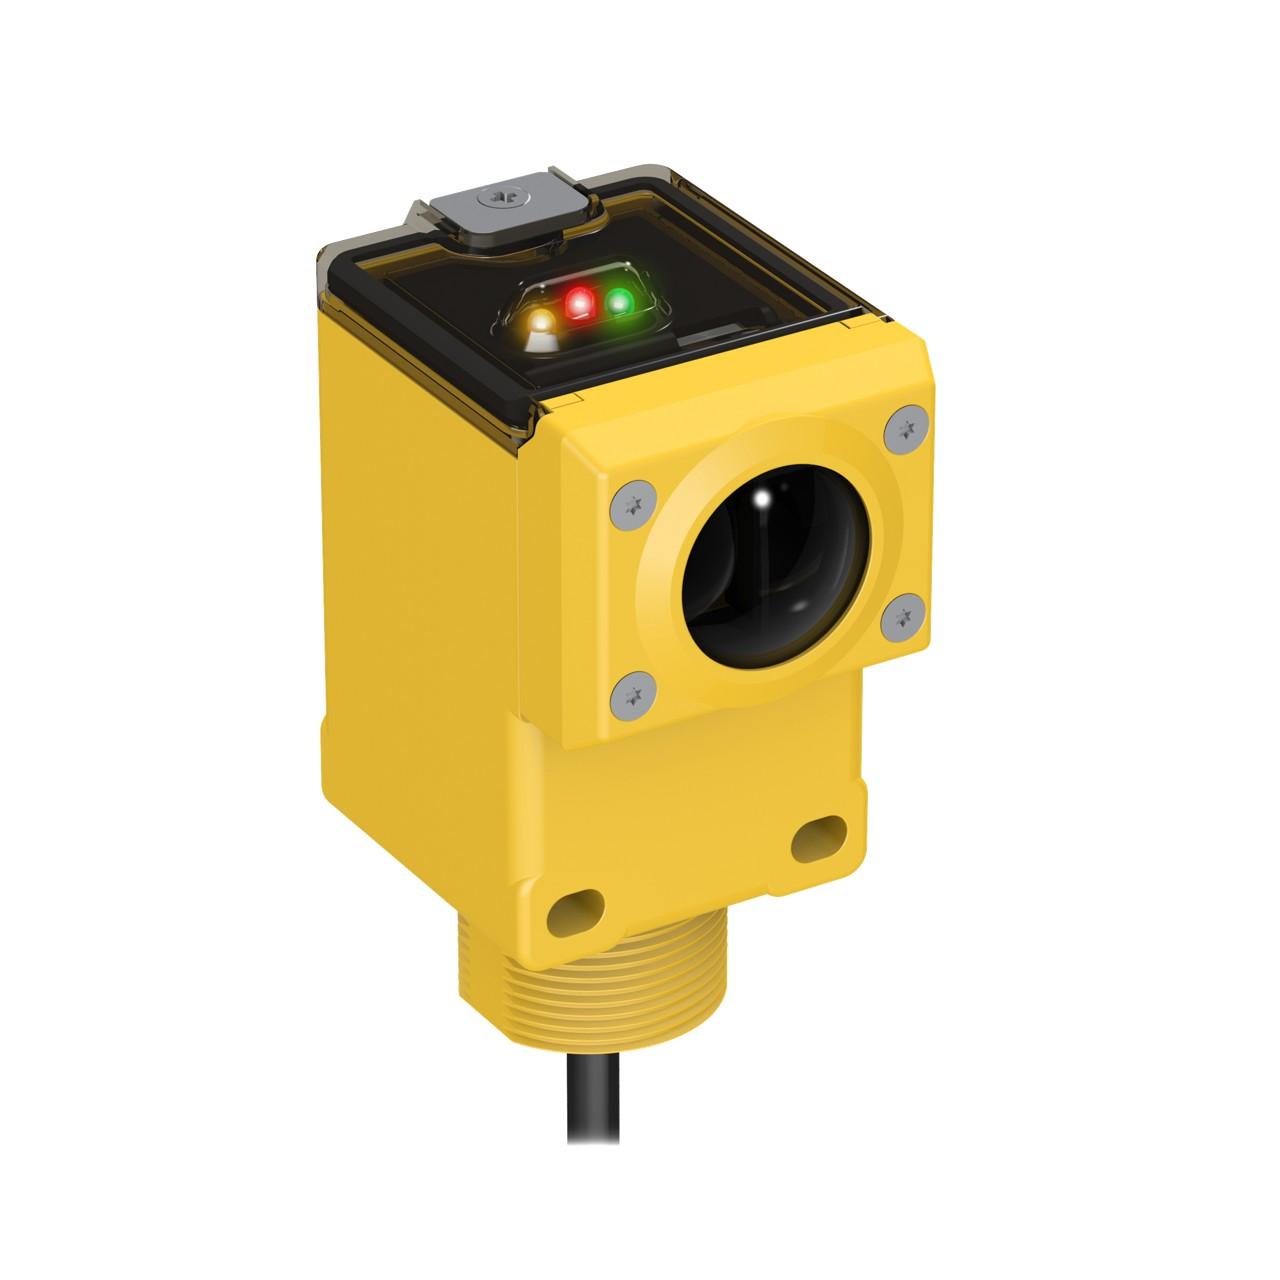 Banner Q45AD9CV4 Intrinsically-safe photo-electric sensor with convergent mode - Banner Engineering (Q series - Q45AD9) - Part #37624 - Sensing range 100mm - Visible red light (680nm) - 1 x digital output (NAMUR) (Light-ON or Dark-ON operation) - Supply voltage 5Vdc-15Vdc